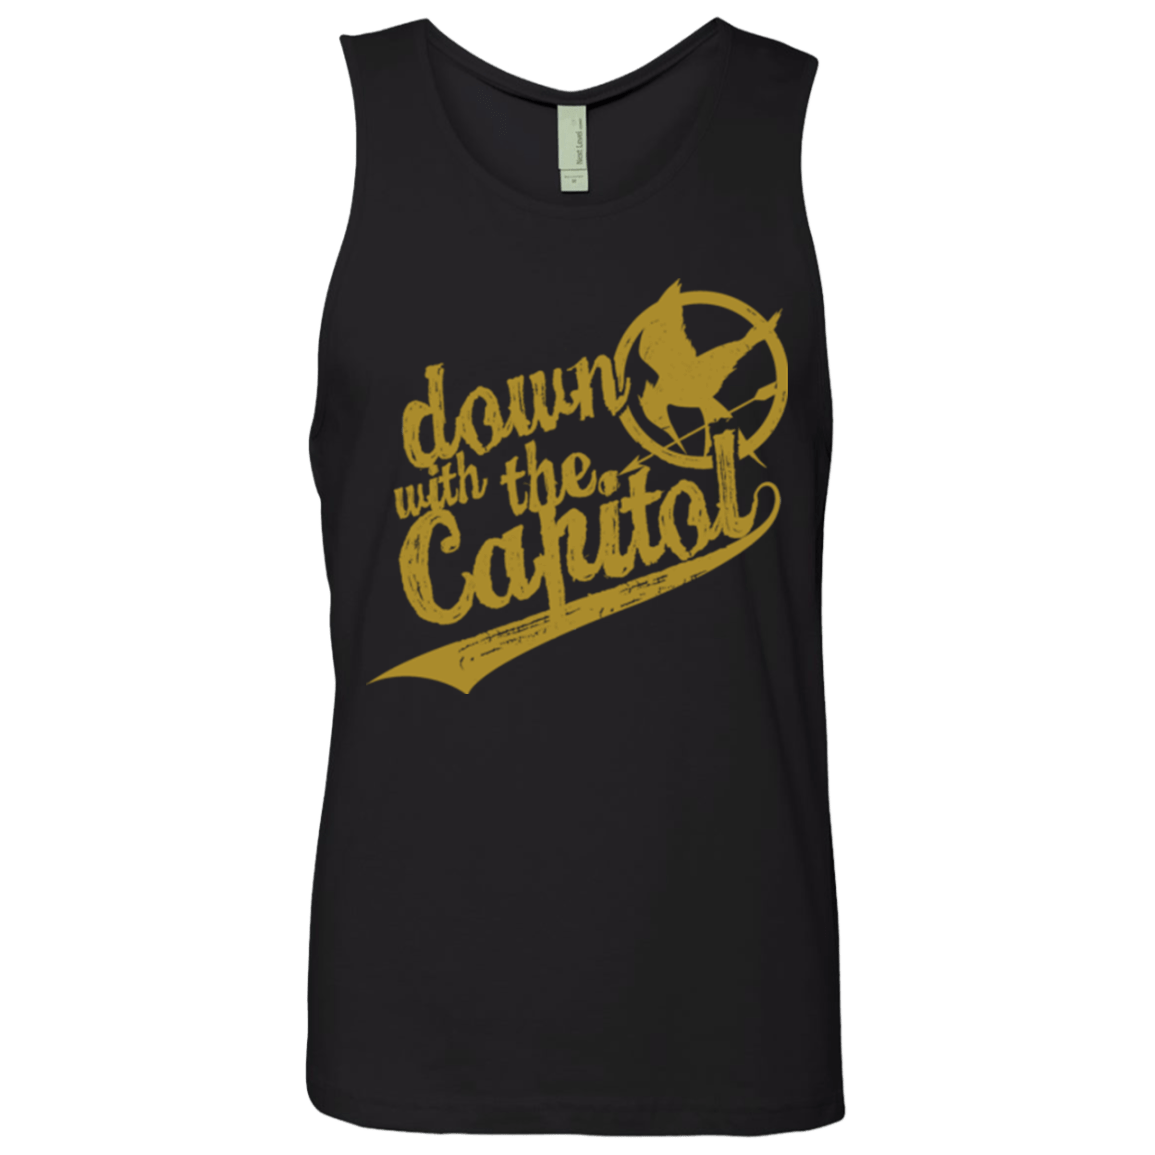 T-Shirts Black / Small Down with the Capitol Men's Premium Tank Top